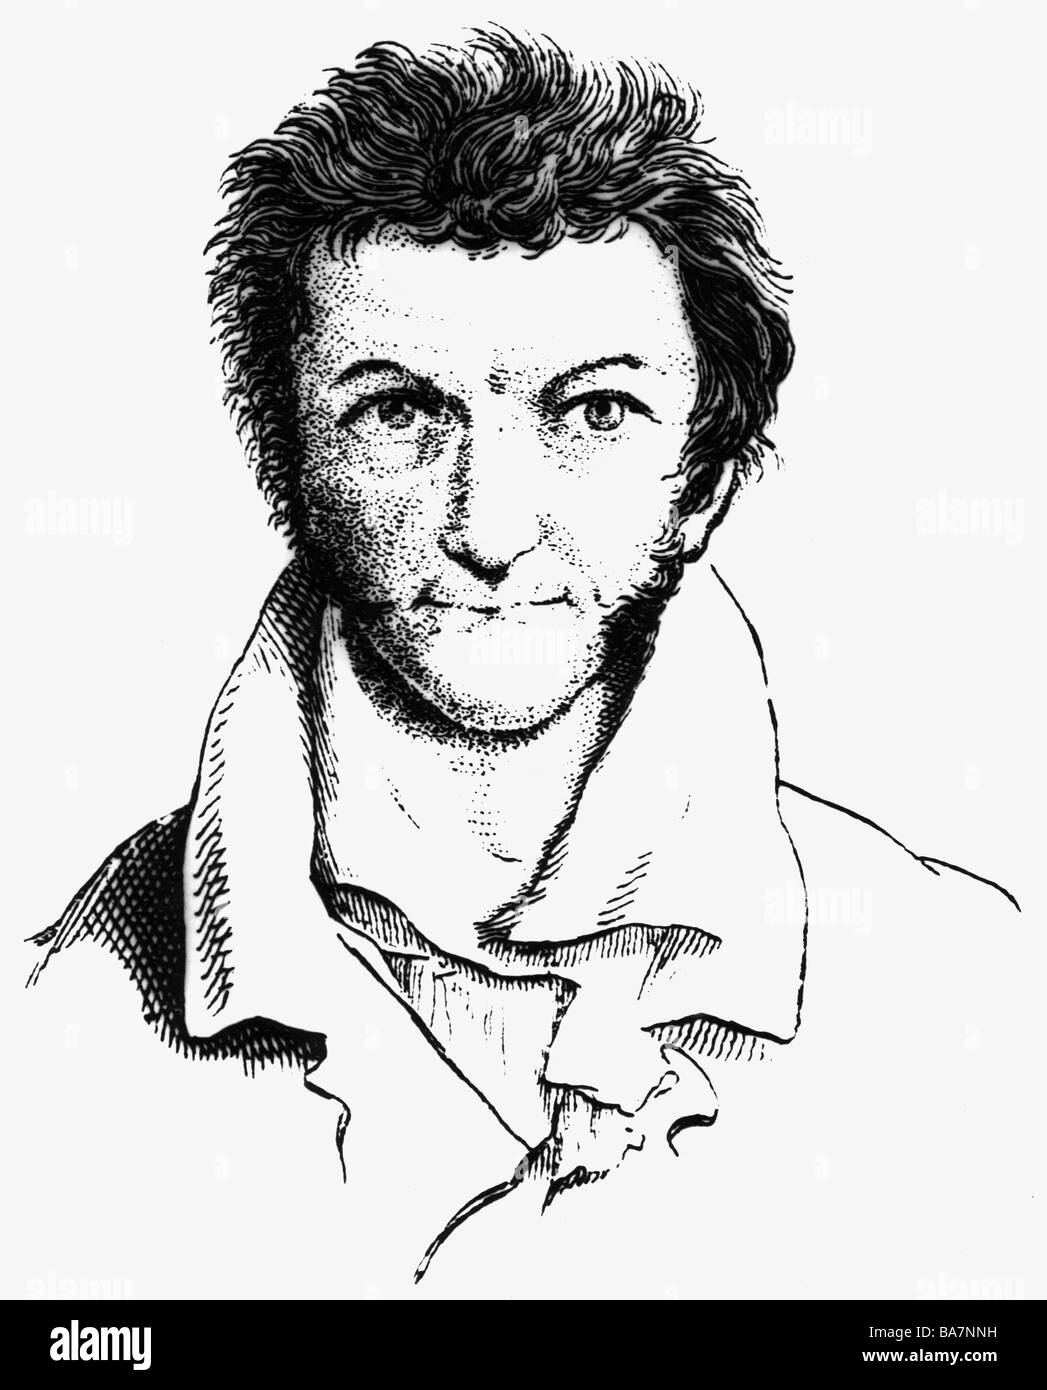 Hoffmann, E.T.A., 24.1.1776 - 25.6.1822, German author / writer (poet), self-portrait from his unpublished works, Stock Photo